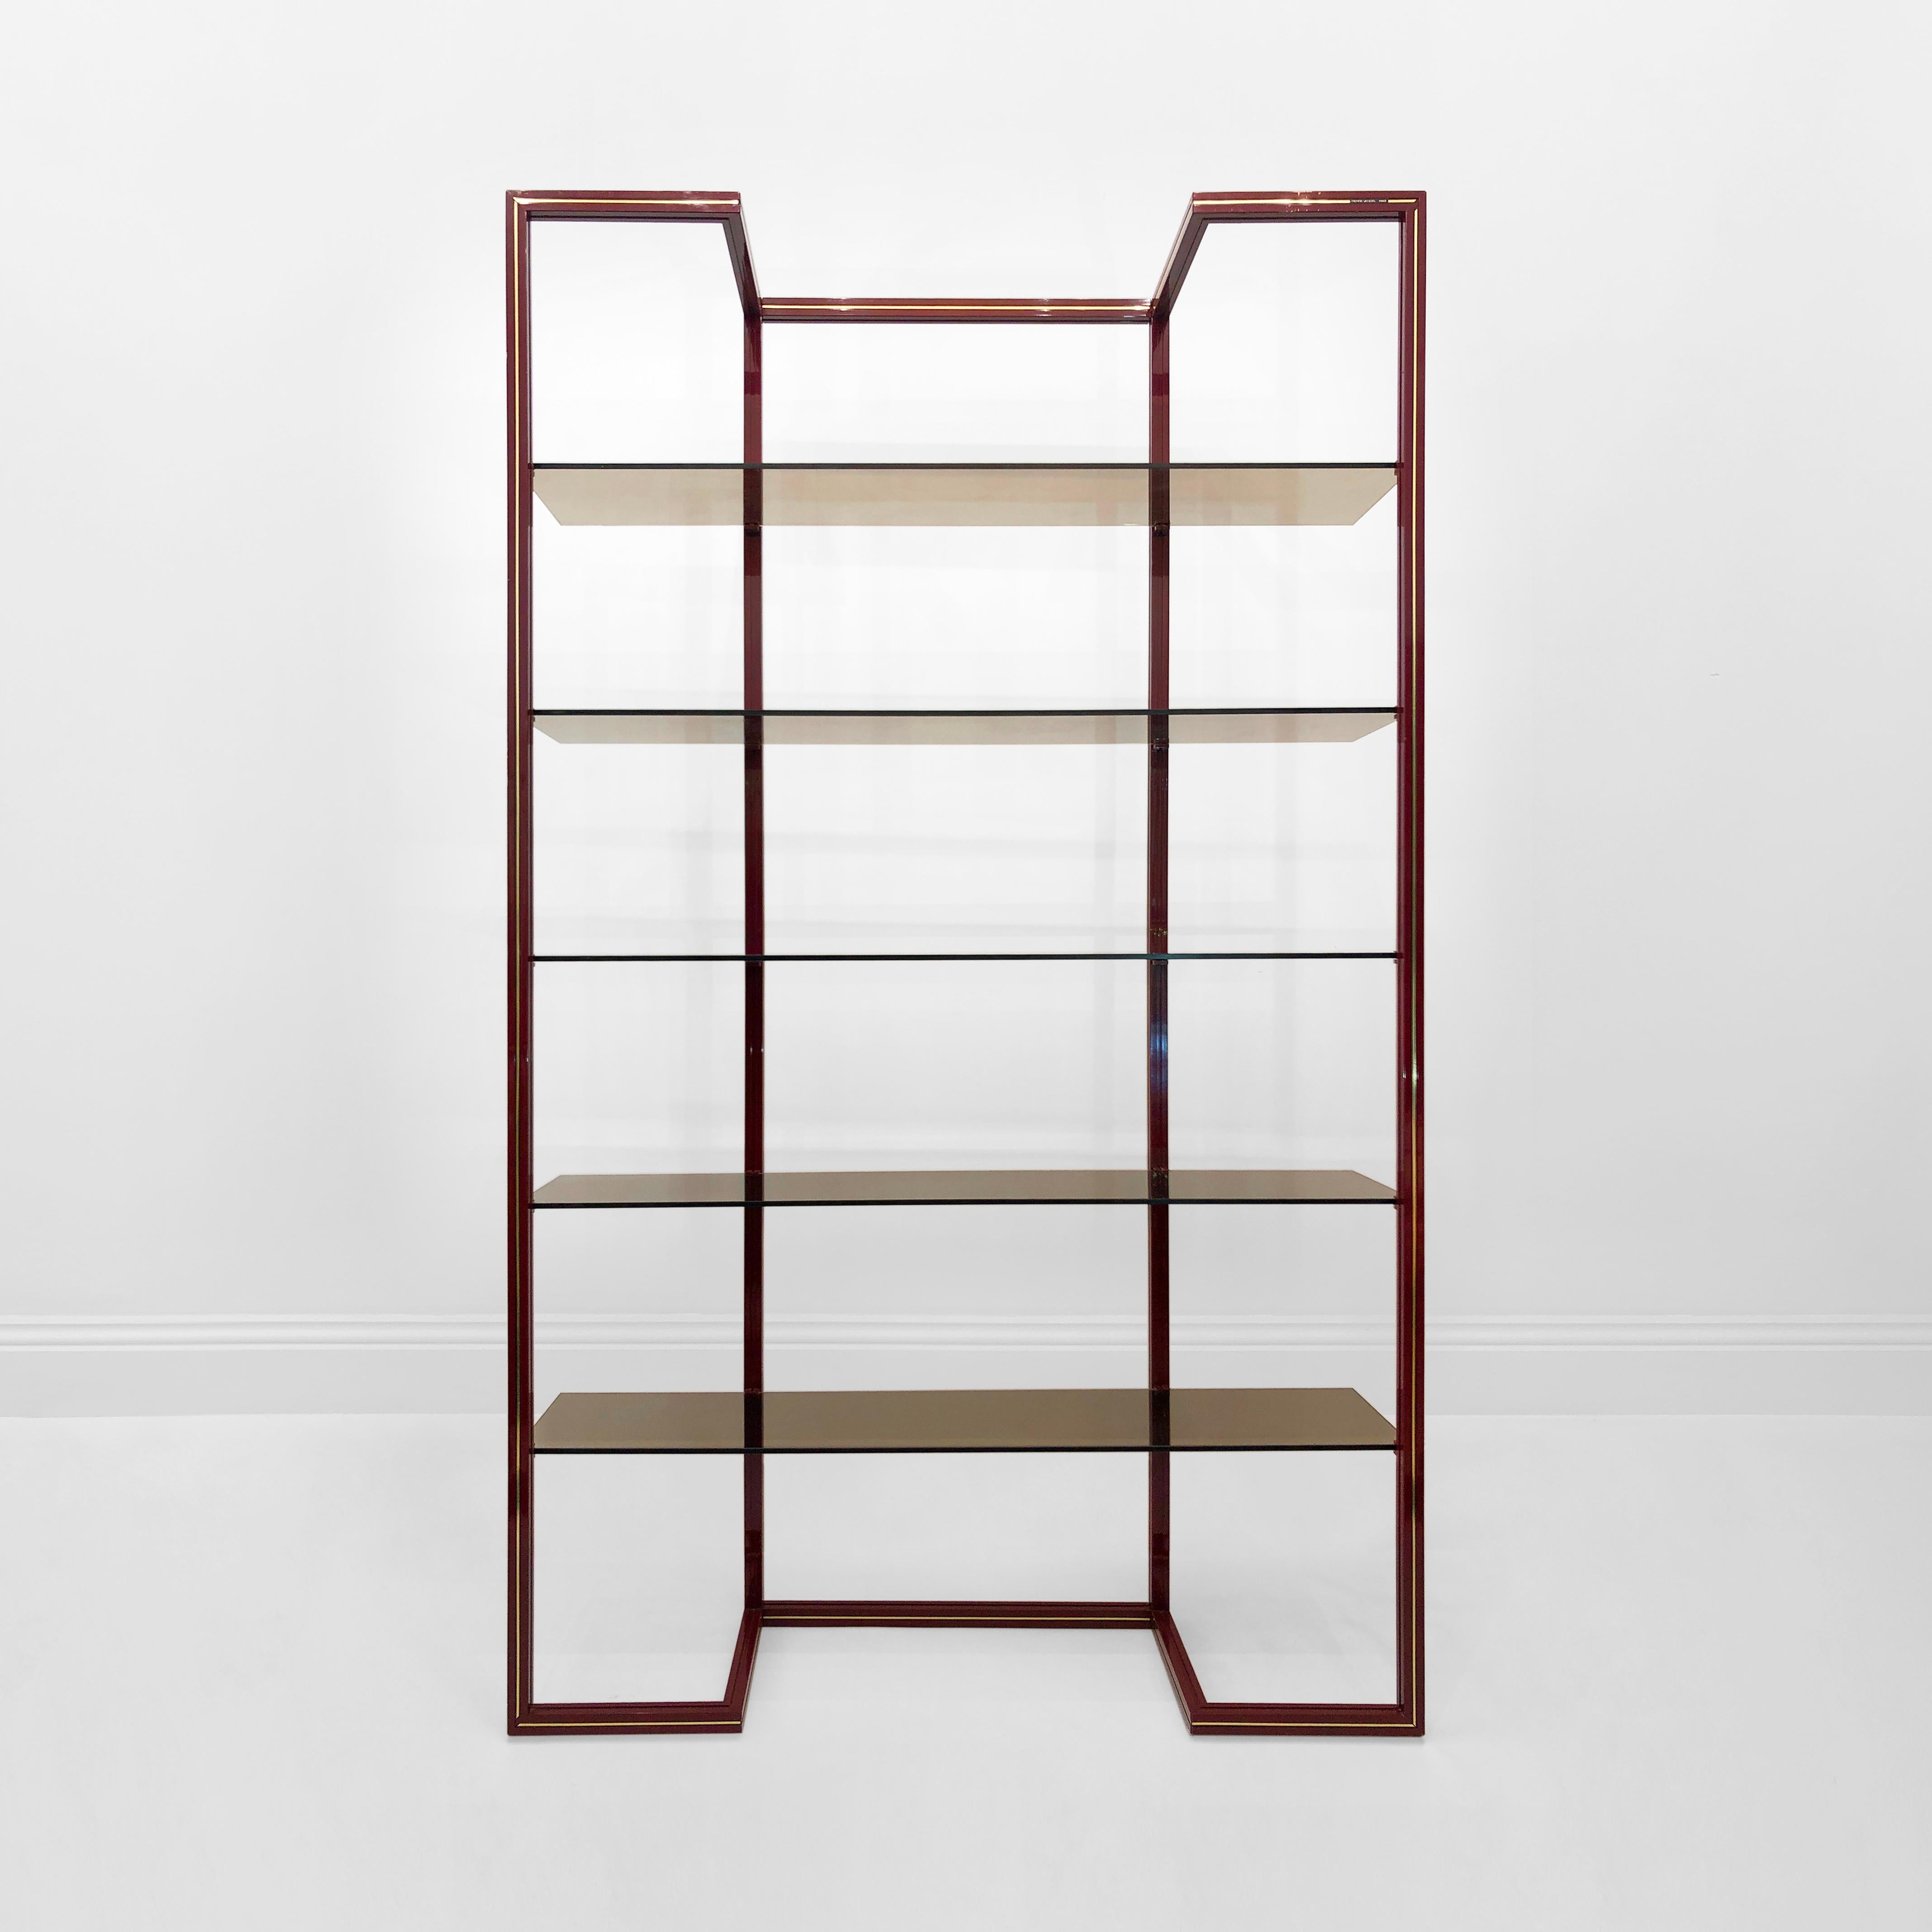 An étagère, in Pierre Vandel's inimitable style, with his idiosyncratic brass stripe down the centre of the deep burgundy powder-coated aluminium frame with a sort of a floating shelves illusion. The five smoked glass shelves complete this display